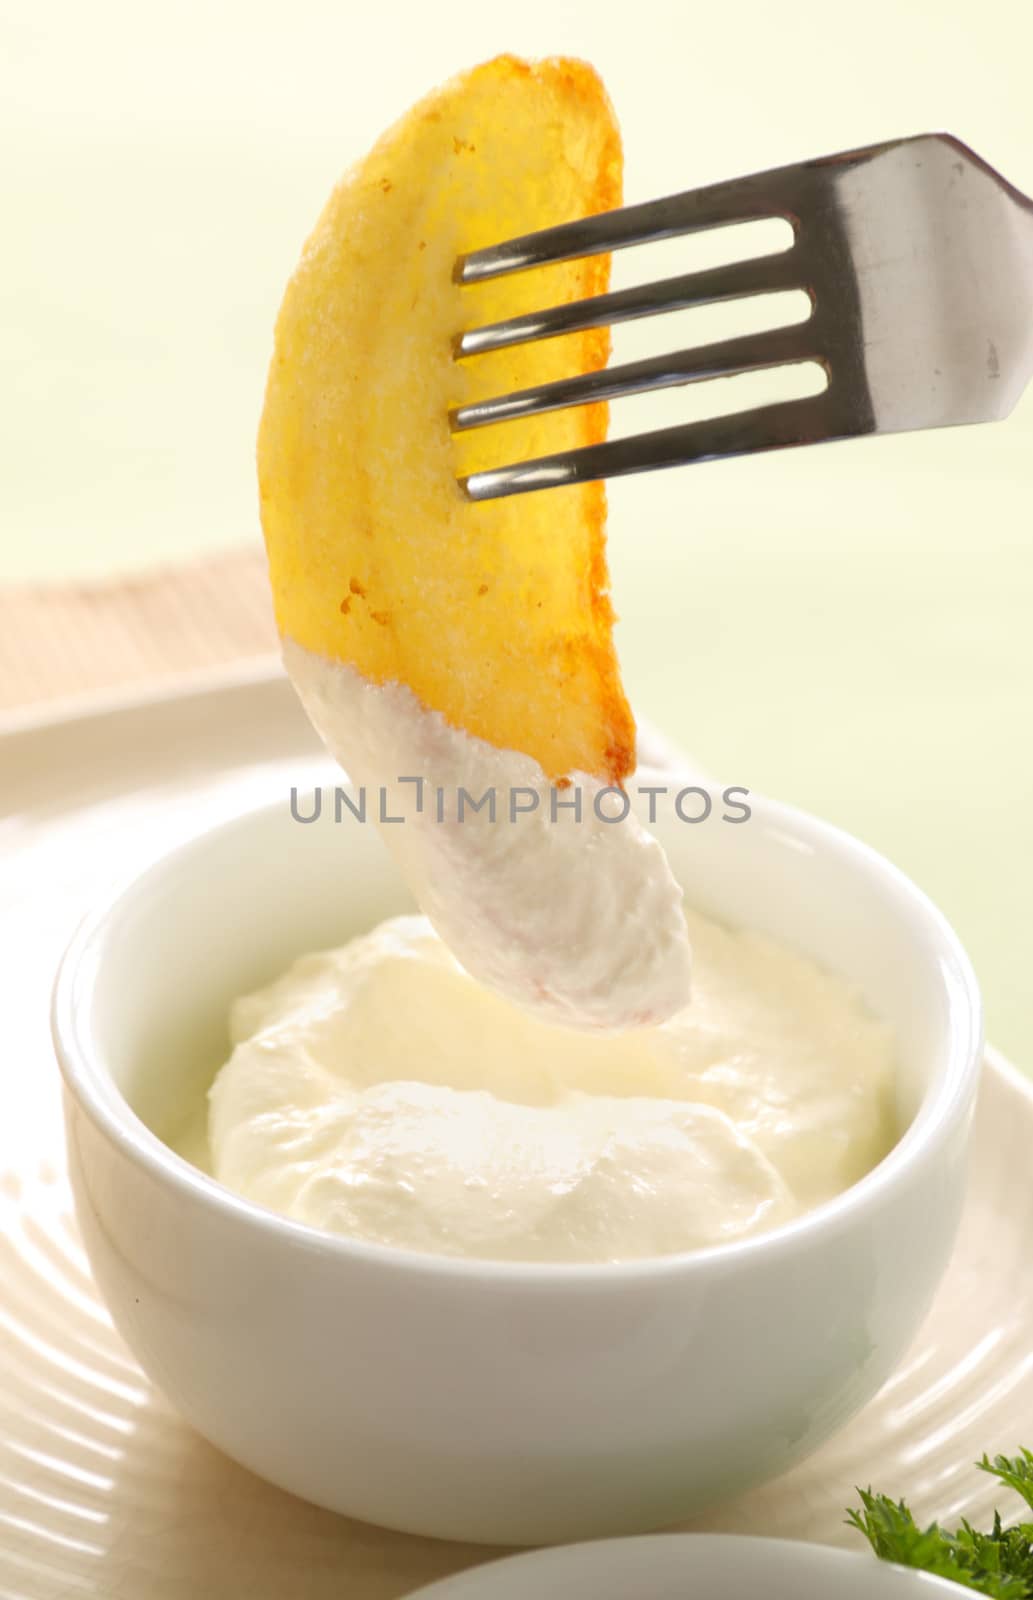 Crispy cooked potato wedge being dipped in sour cream.